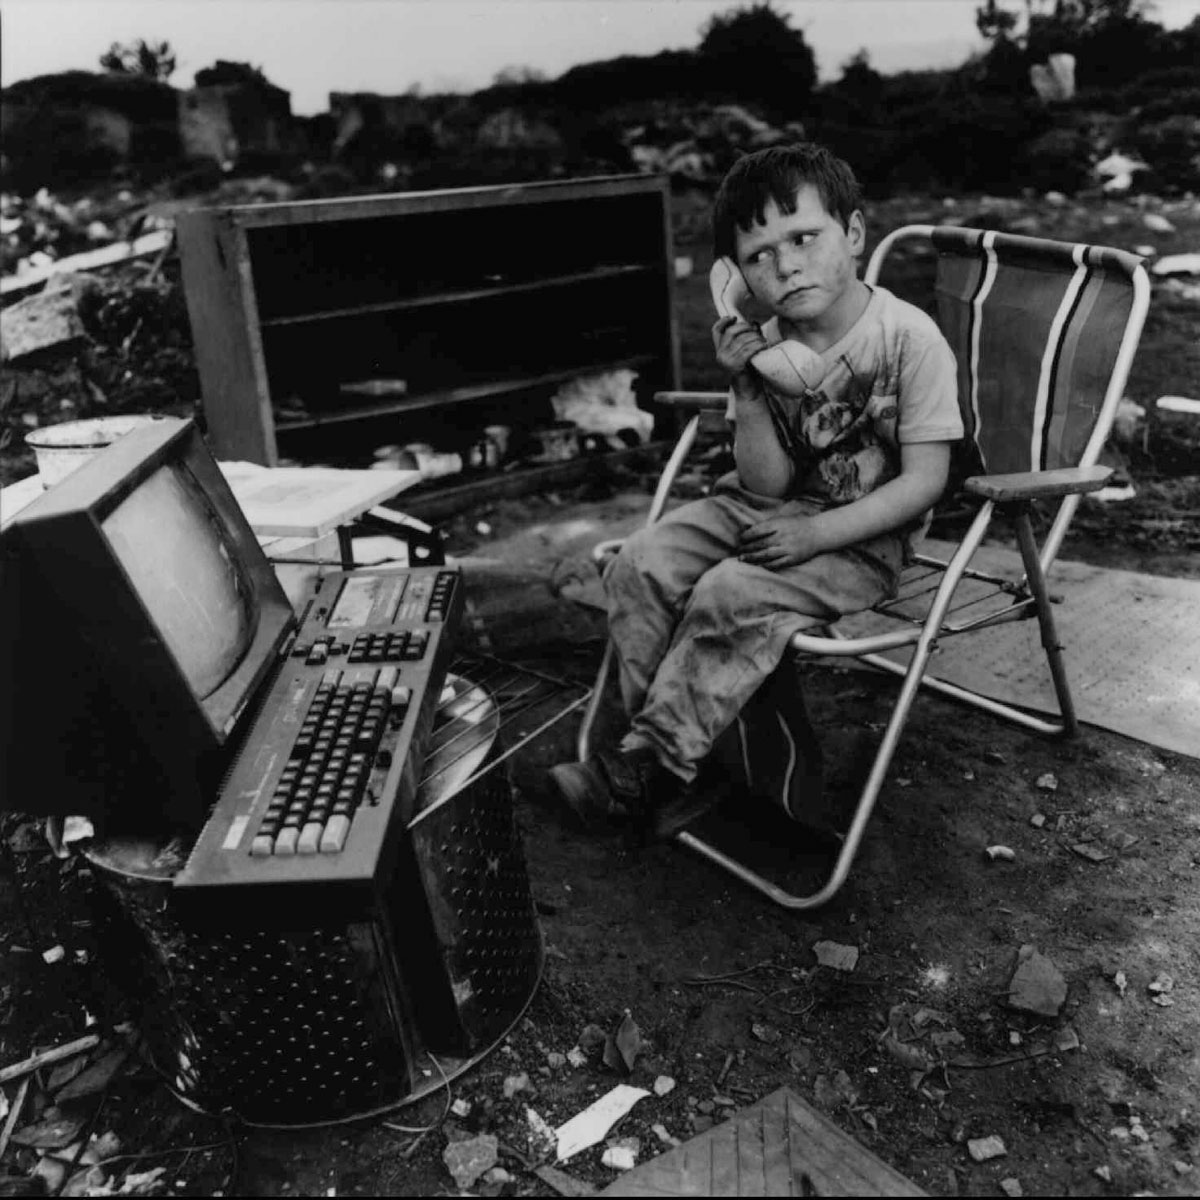 A little boy creates his own fantasy game amid his junky surroundings, in this photograph by Mary Ellen Mark, "Paddy Joyce. Travellers Encampment at Funglas, Ireland, 1991." The photograph is among 150 on show in a current exhibition, "The Magic of Play." (AP Photo/Kreisberg Group Ltd. /Mary Ellen Mark)